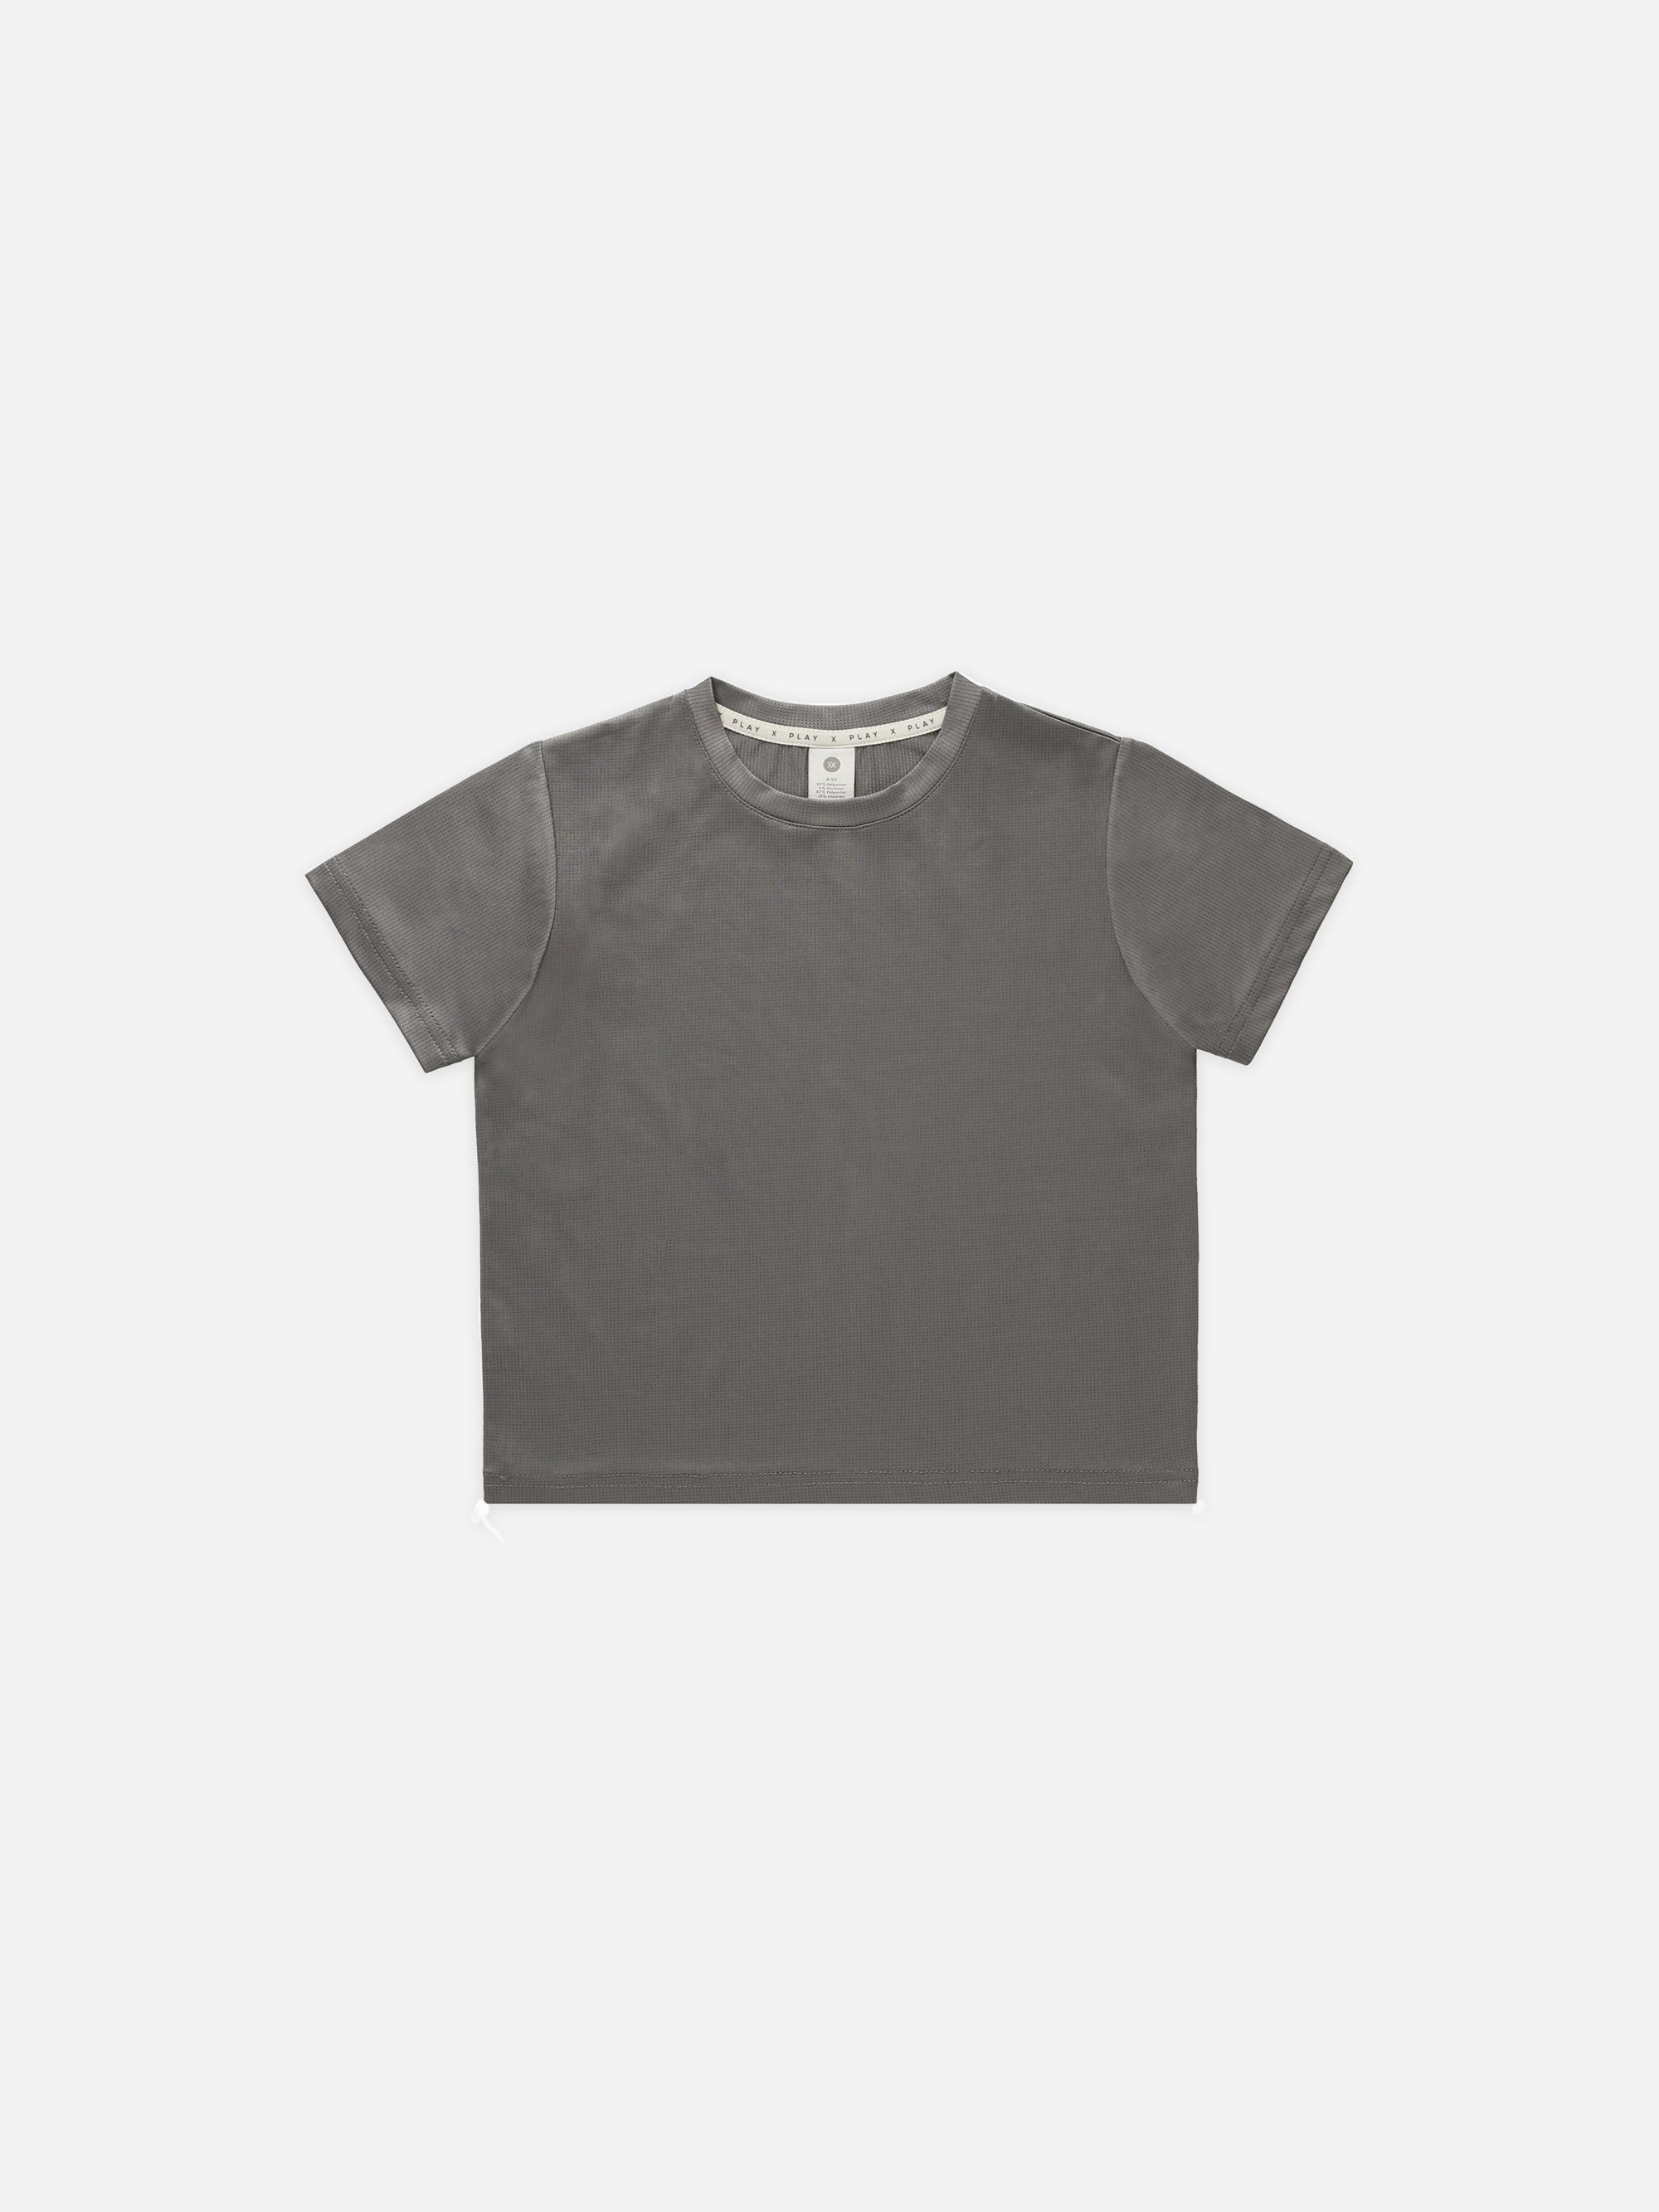 Training Tee || Grey - Rylee + Cru | Kids Clothes | Trendy Baby Clothes | Modern Infant Outfits |